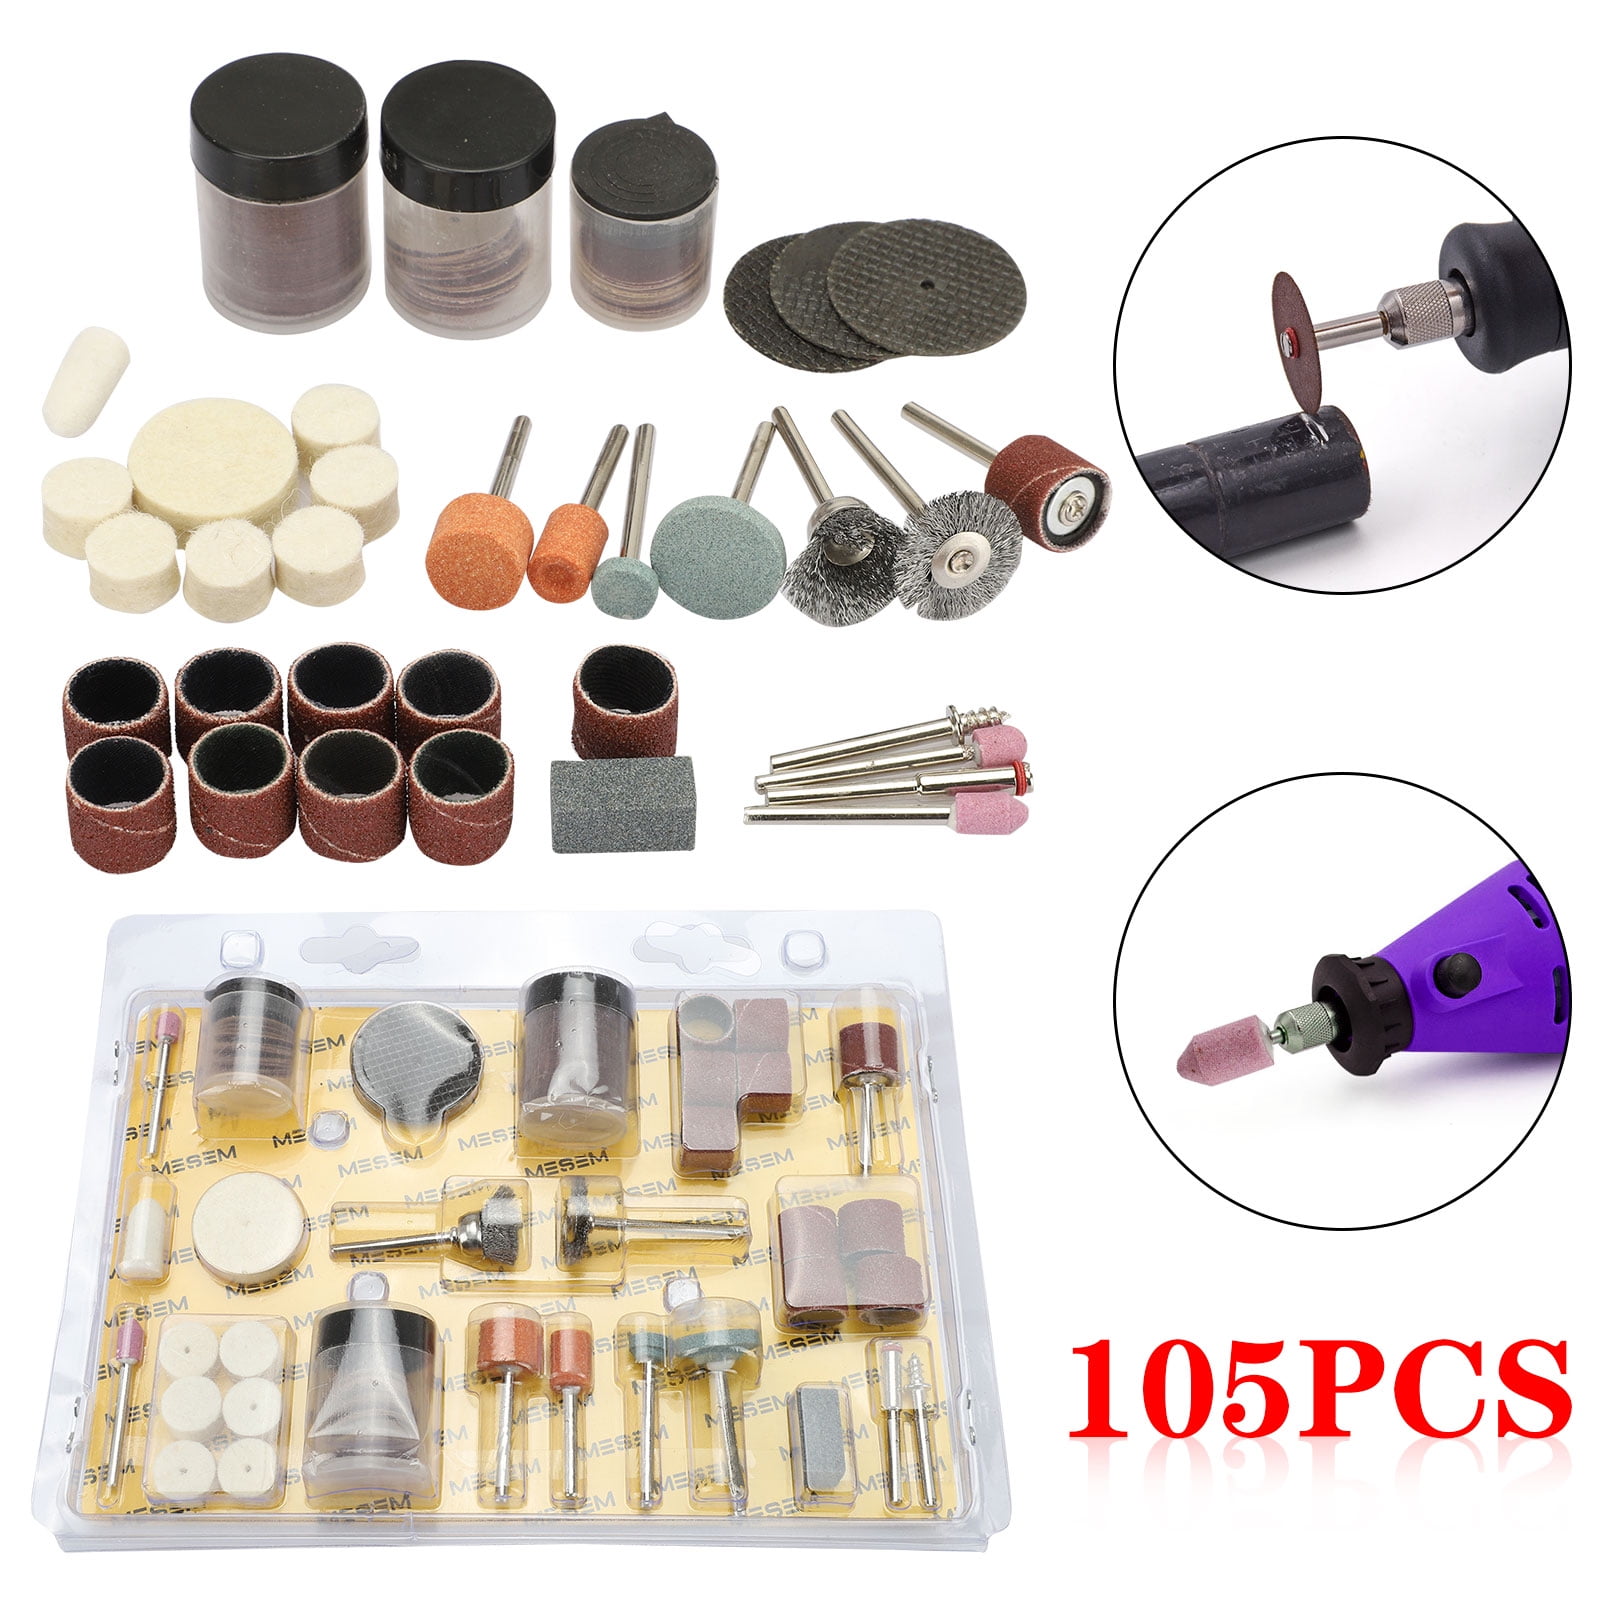 Rotary Tool Accessories kit for Grinding and Polishing-TP105